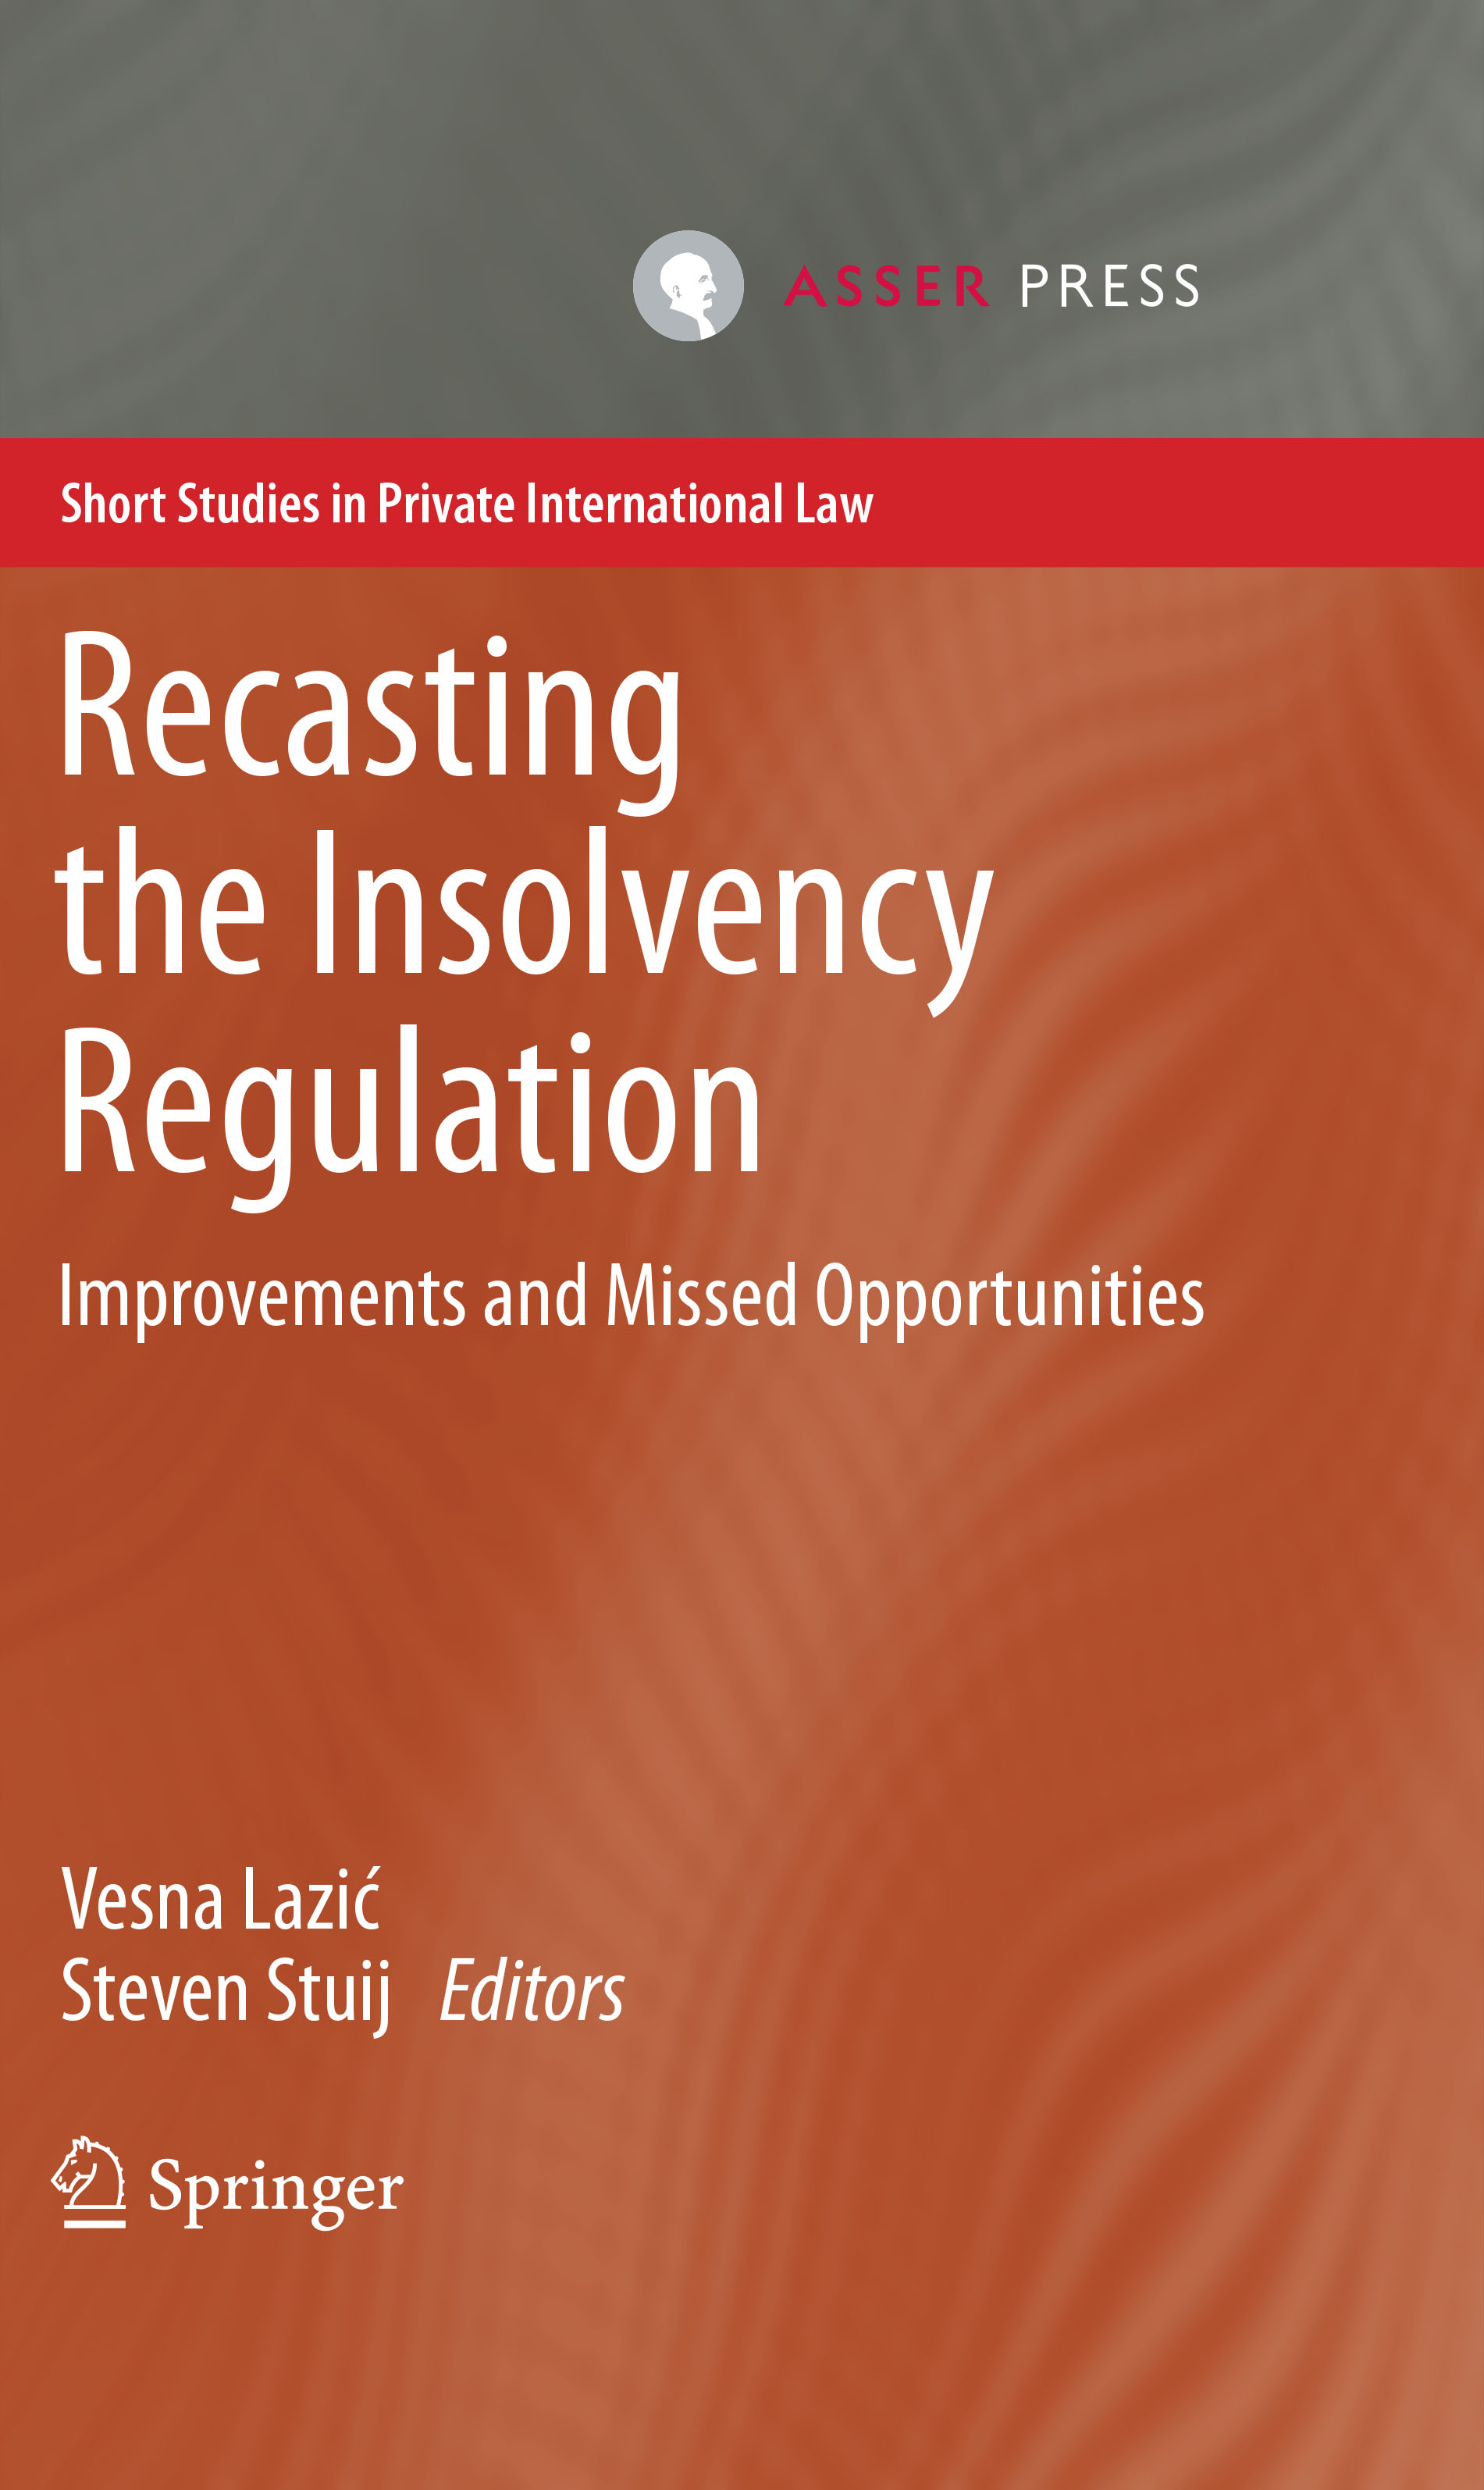 Recasting the Insolvency Regulation - Improvements and Missed Opportunities